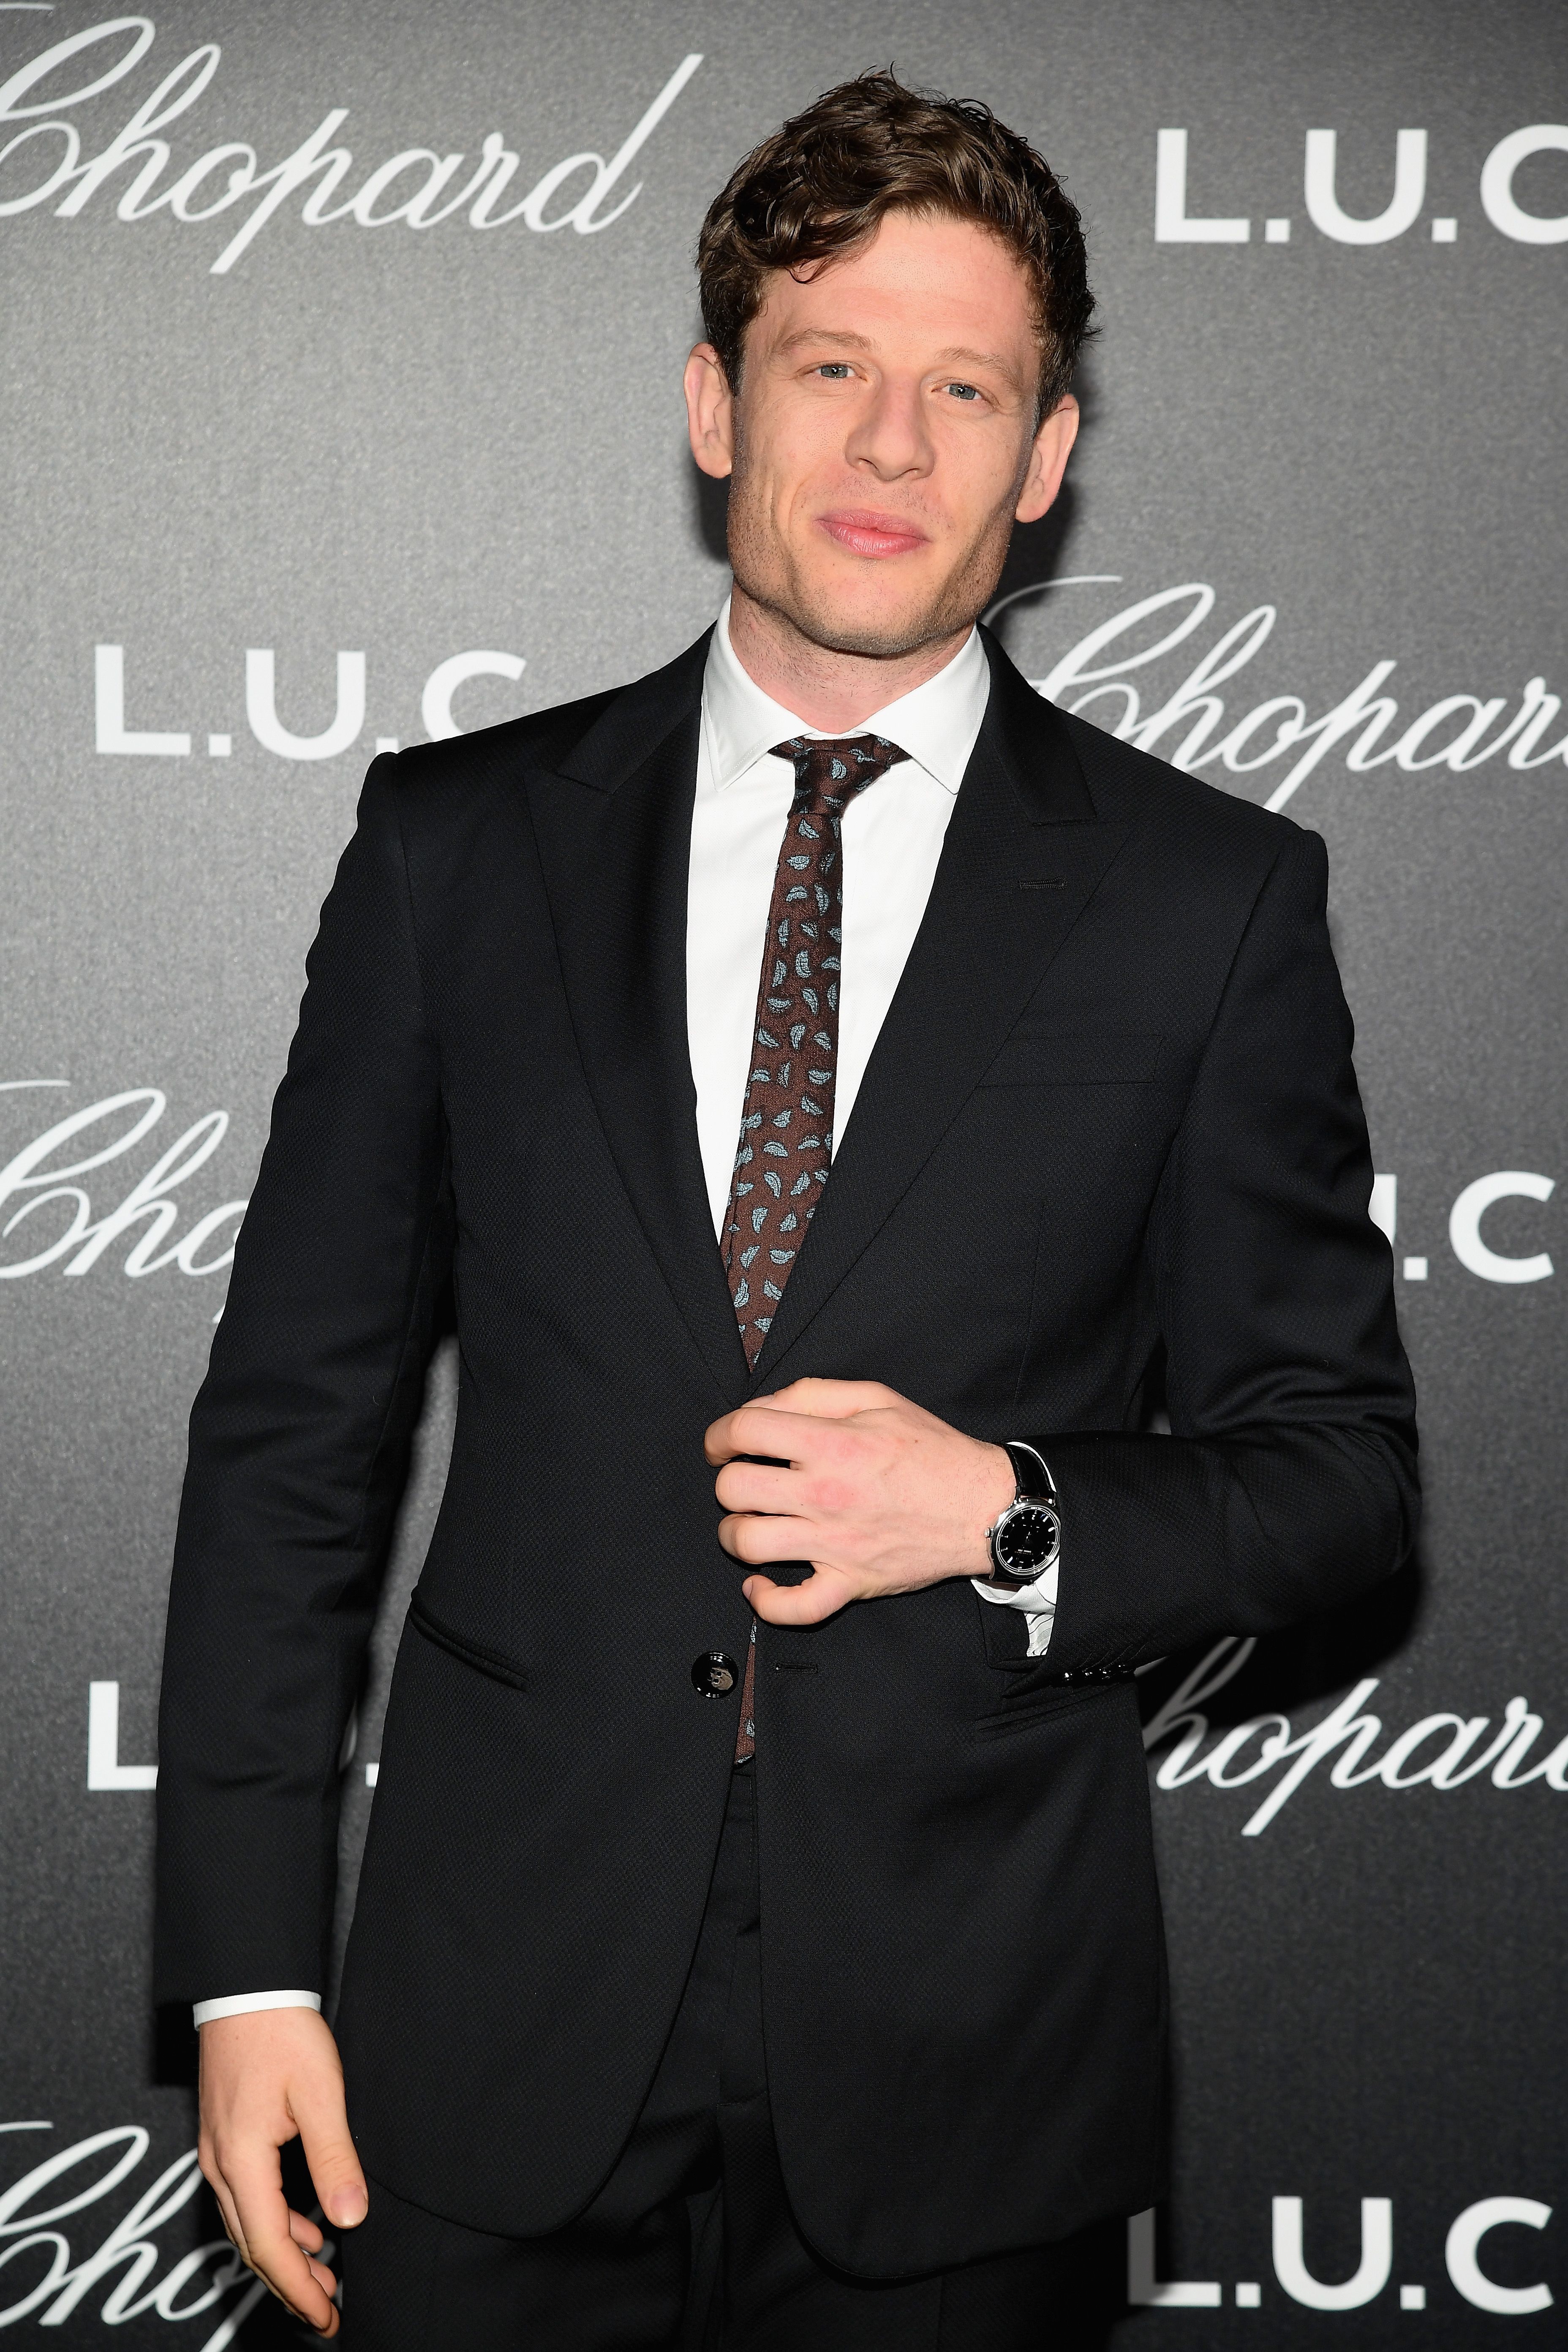 James Norton at the Chopard Gentleman's Evening in 2018 in Cannes, France | Source: Getty Images